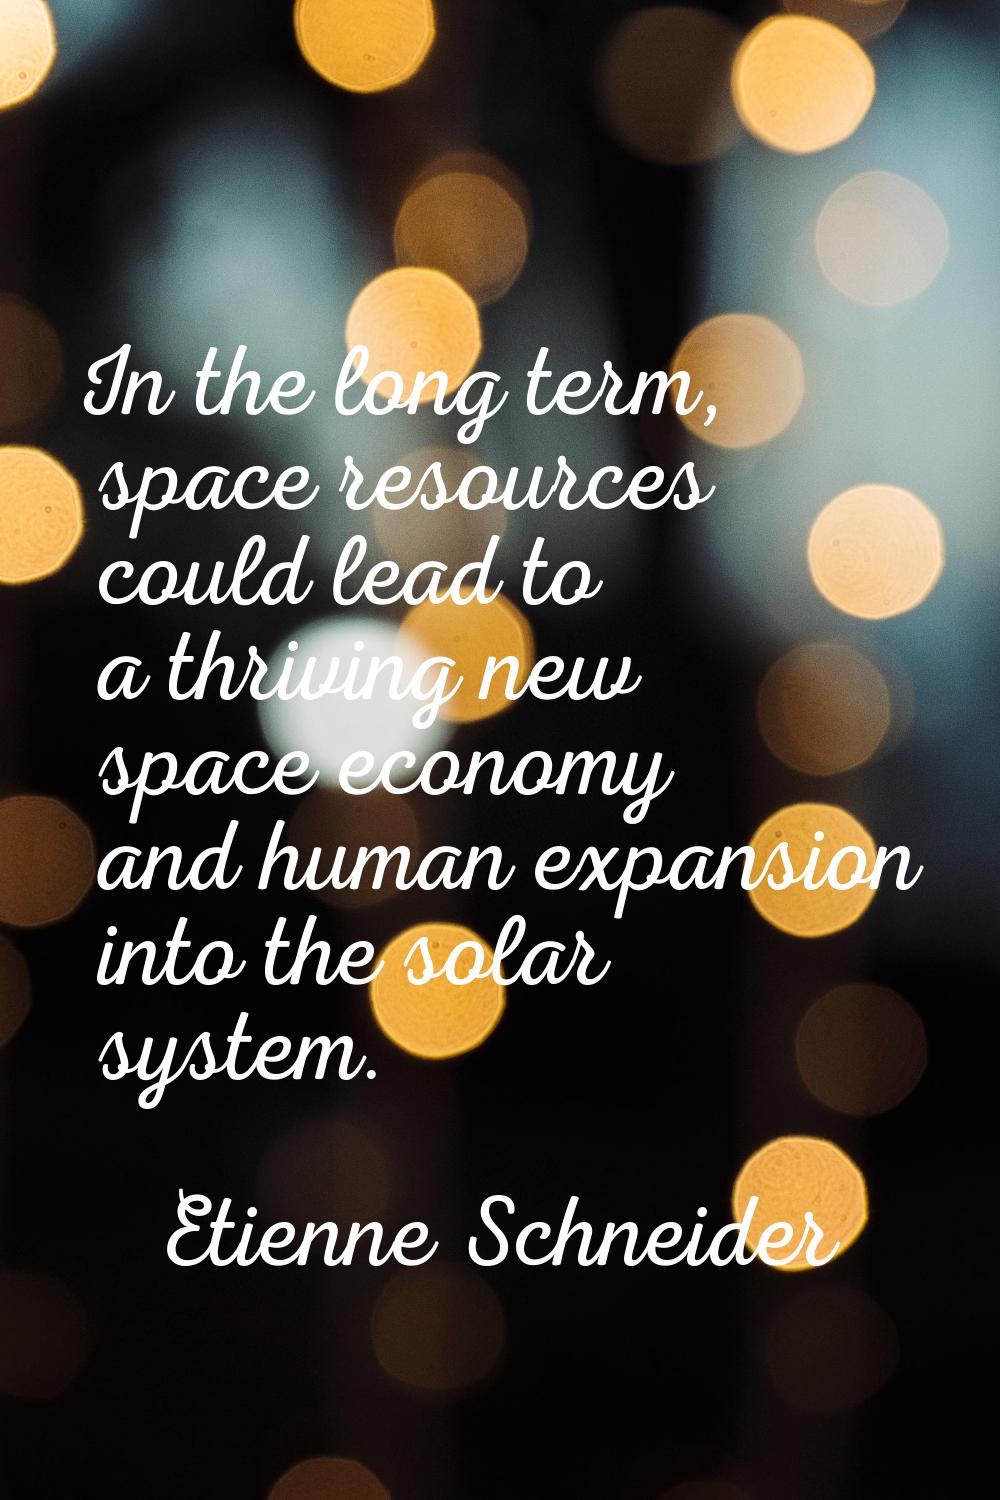 In the long term, space resources could lead to a thriving new space economy and human expansion in